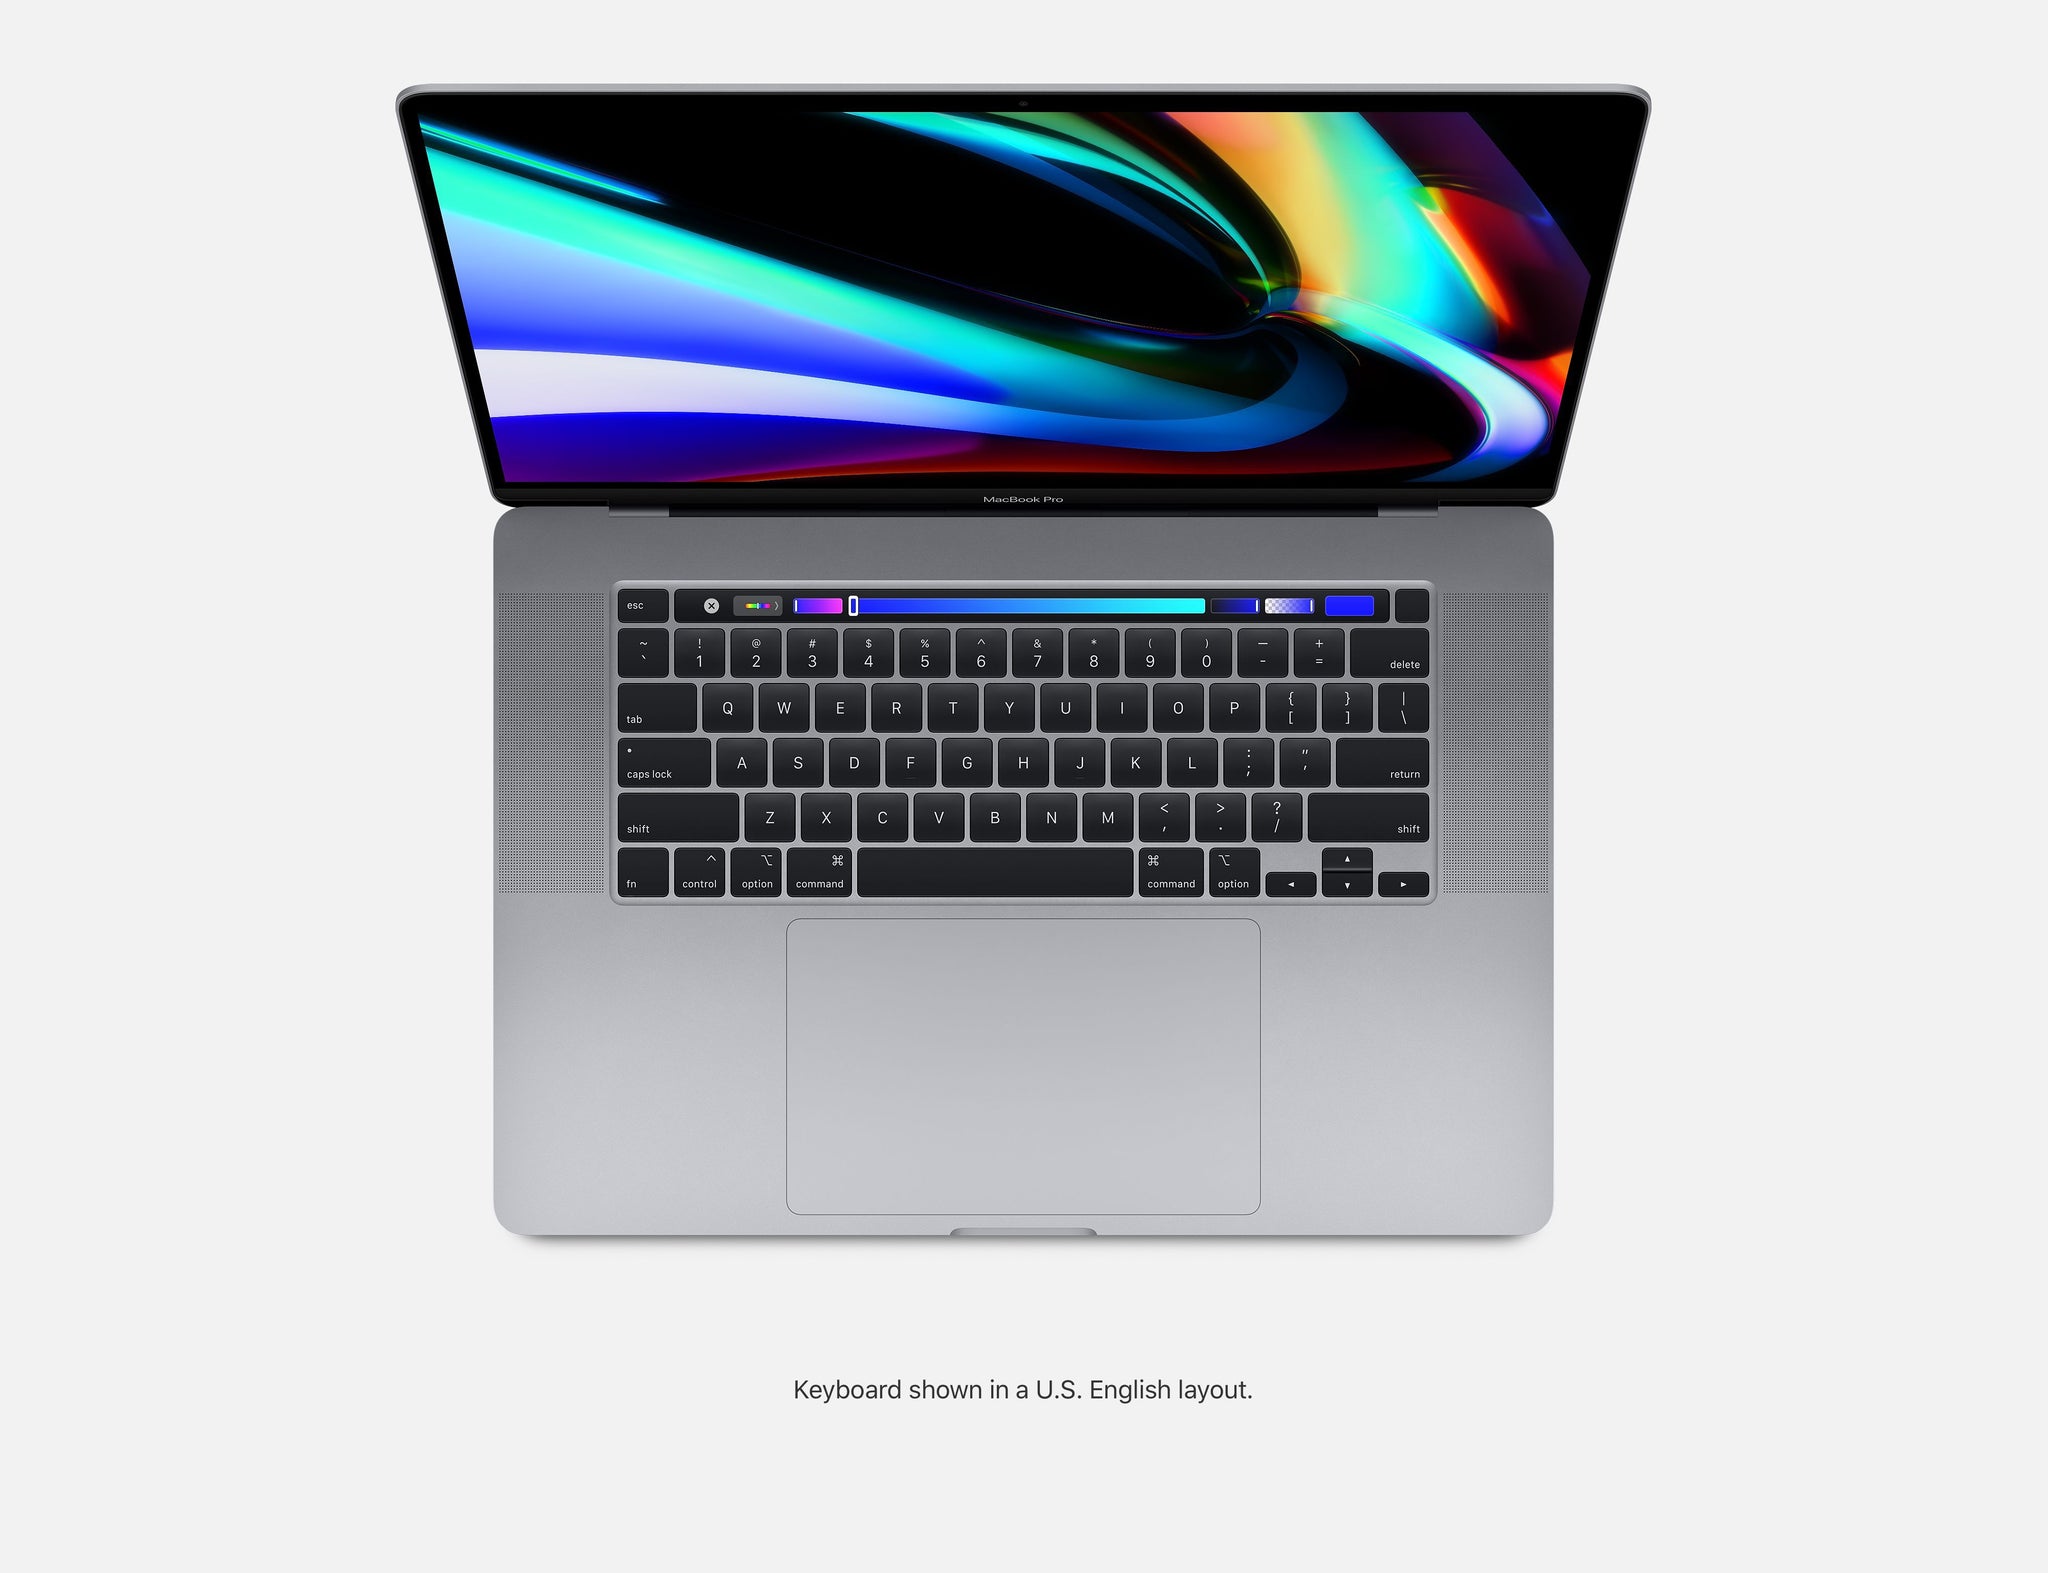 Apple MacBook Pro 16" with Touch Bar,9th-Gen 6-Core Intel Core i9 2.6GHz,32GB RAM,1TBSSD,Late 2019